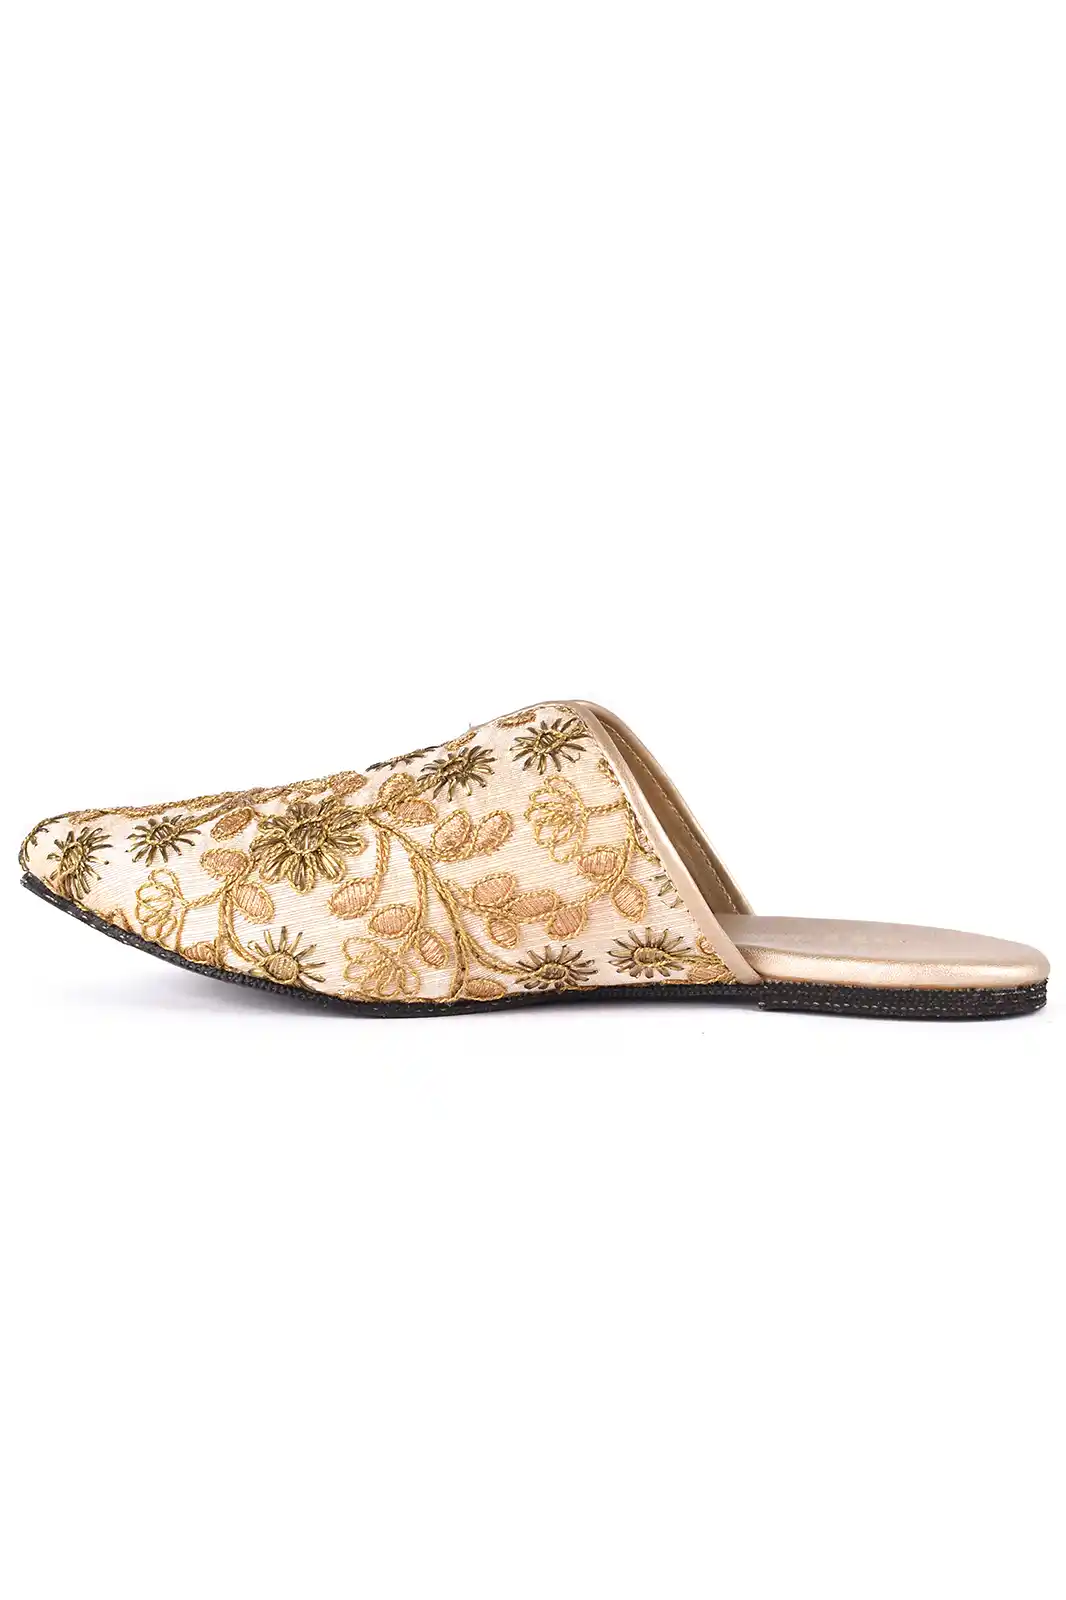 Paaduks Mana Gold Mules Embroidered, womens heels footwears, womens heels sandals, women's heels sandals, high heels sandals, women's heels footwear, flipkart women's footwear heels, high heels wedding sandals, womens sandals heels, women's heel sandals, women's shoe brands, womens sandals crocs, women's shoes online, women's footwear flats, white womens sandals, womens shoes amazon, womens sandals comfort, womens sandals flipkart, women's trending shoes, women's sandals brands, womens footwear online, organic footwear, vegan footwear india, vegan shoes in india, vegan shoes india, best brand for women's sandals in india, best women's sandals brands, eco friendly footwear brands in india, vegan shoes brands in india